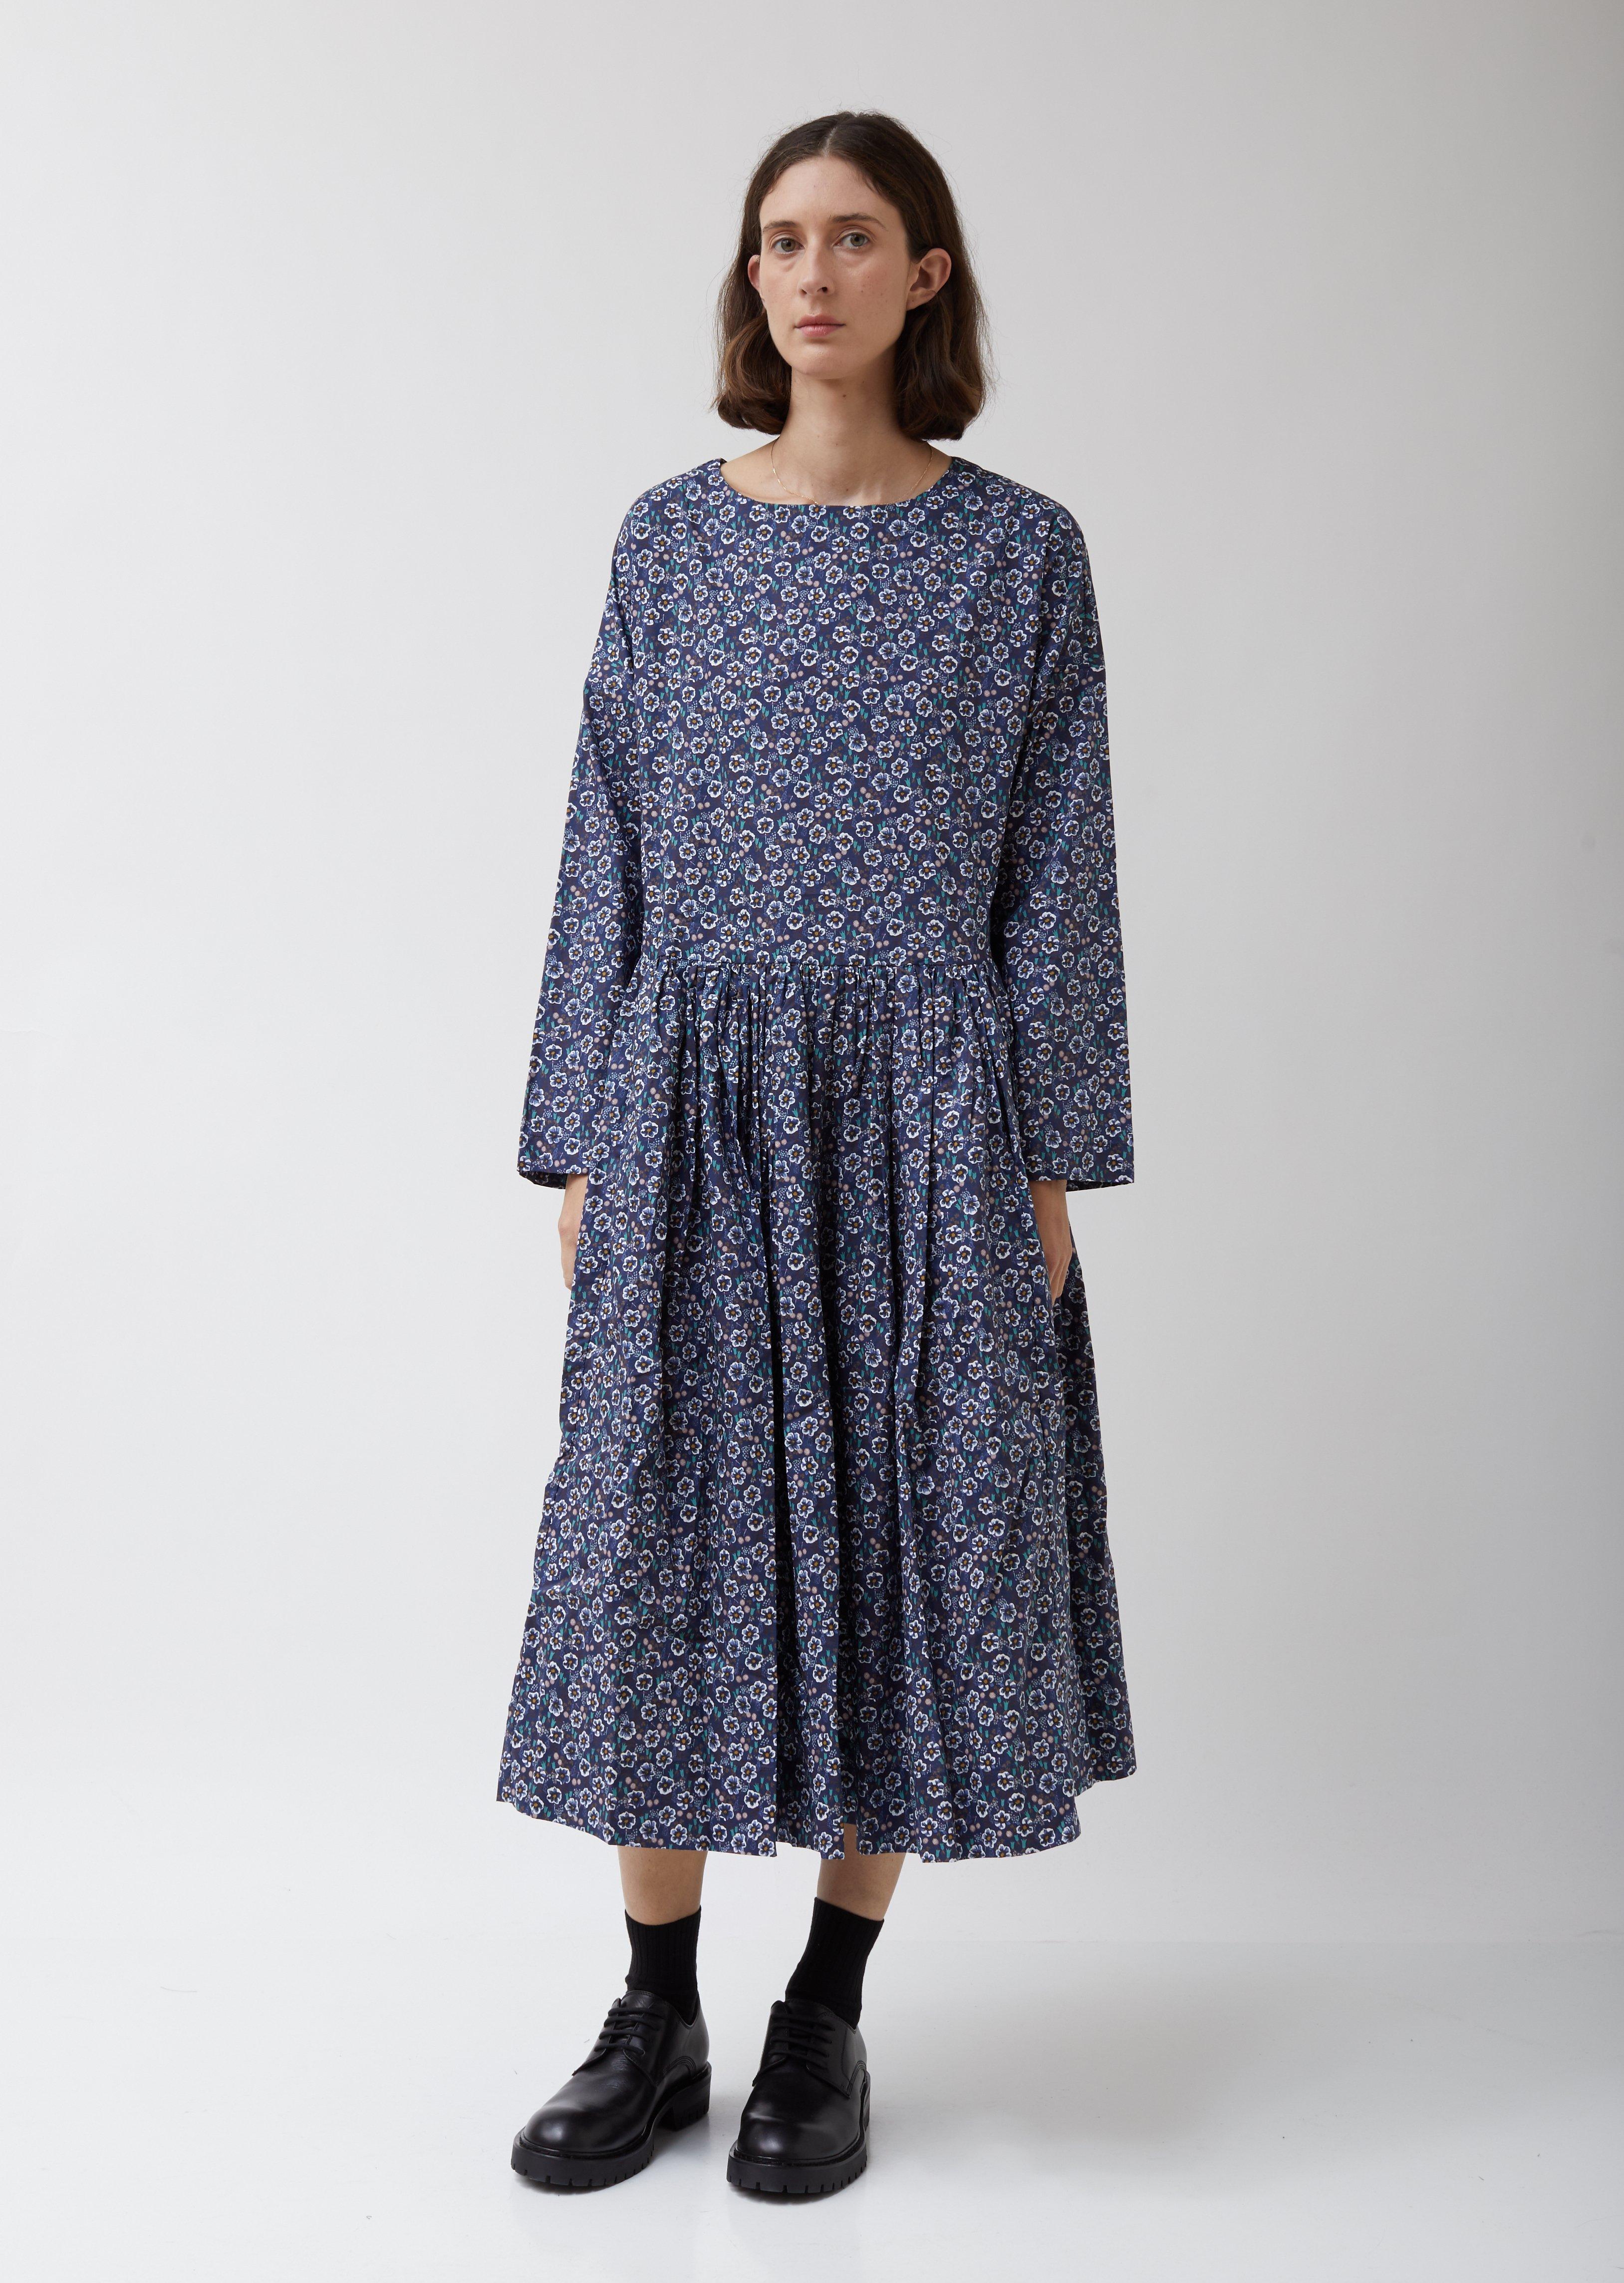 Casey Casey Cotton Pasha Rouch Dress In Point Floral in Navy (Blue) - Lyst